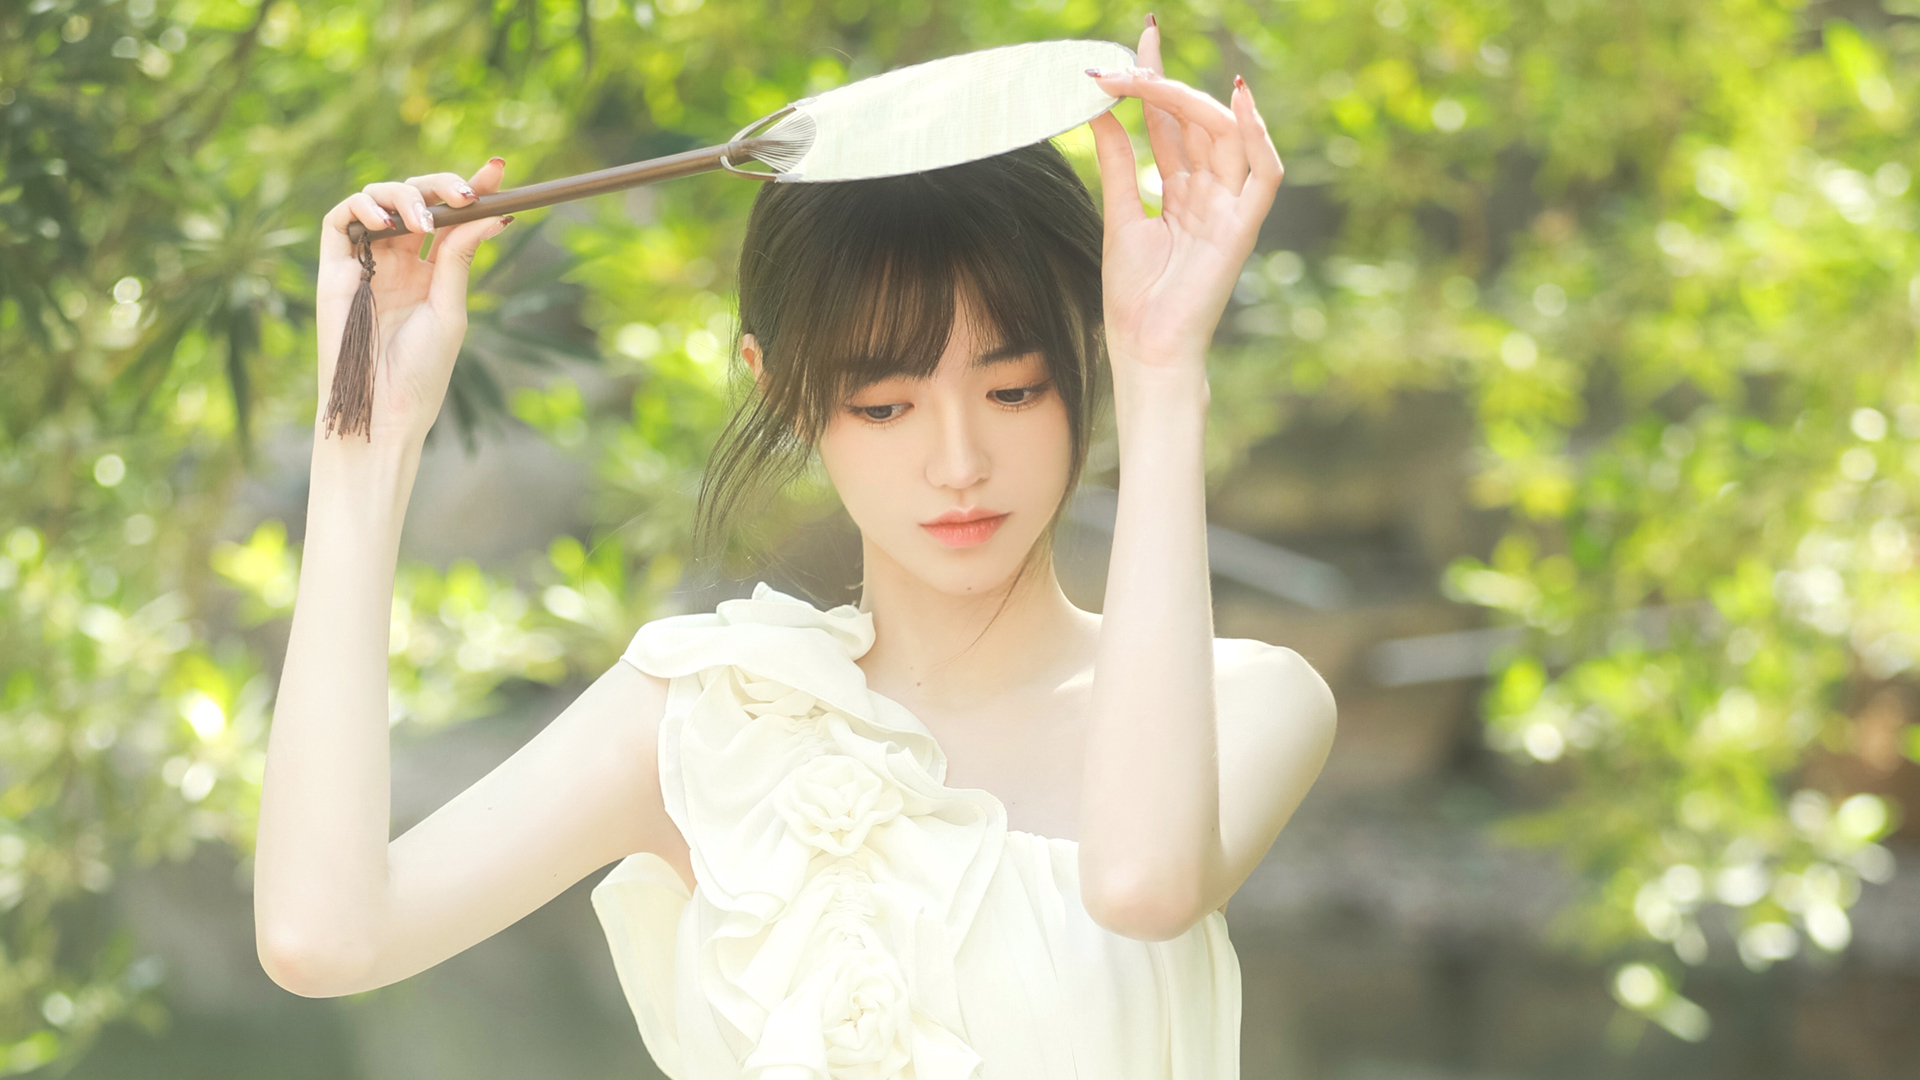 Asian White Clothing Leaves Trees Black Hair Outdoors 1920x1080